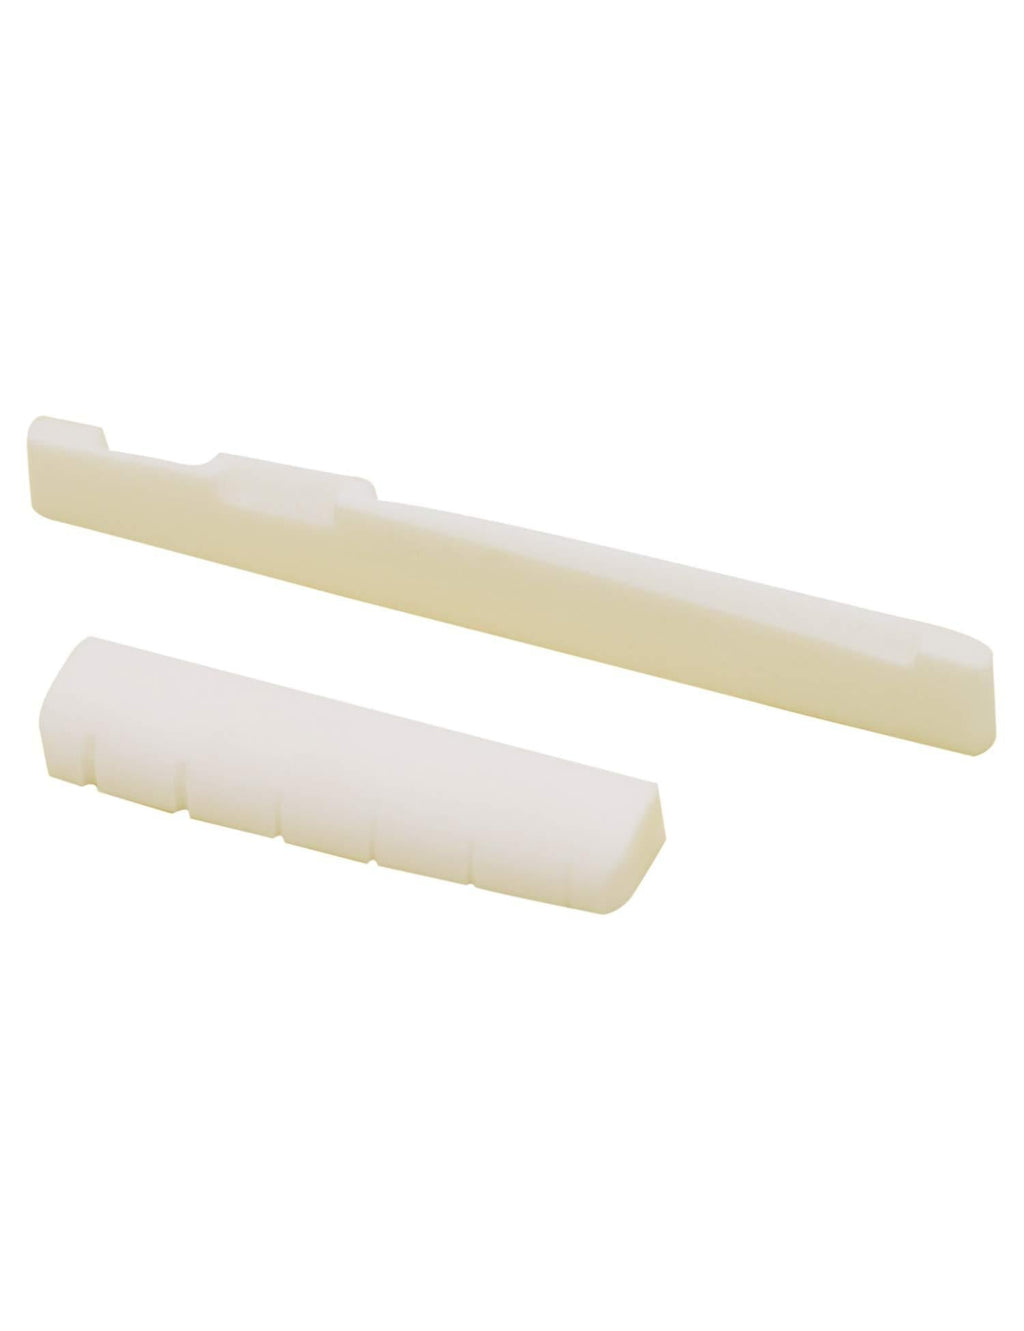 Metallor Bone Bridge Nut and Saddle for Folk Acoustic Guitar Parts Replacement 6 String Pre Slotted White 43 x 9 x 6mm Nut and 73 x 9.5 x 3mm Saddle. Nut: 43×9×6mm+Saddle: 73×9.5×3mm